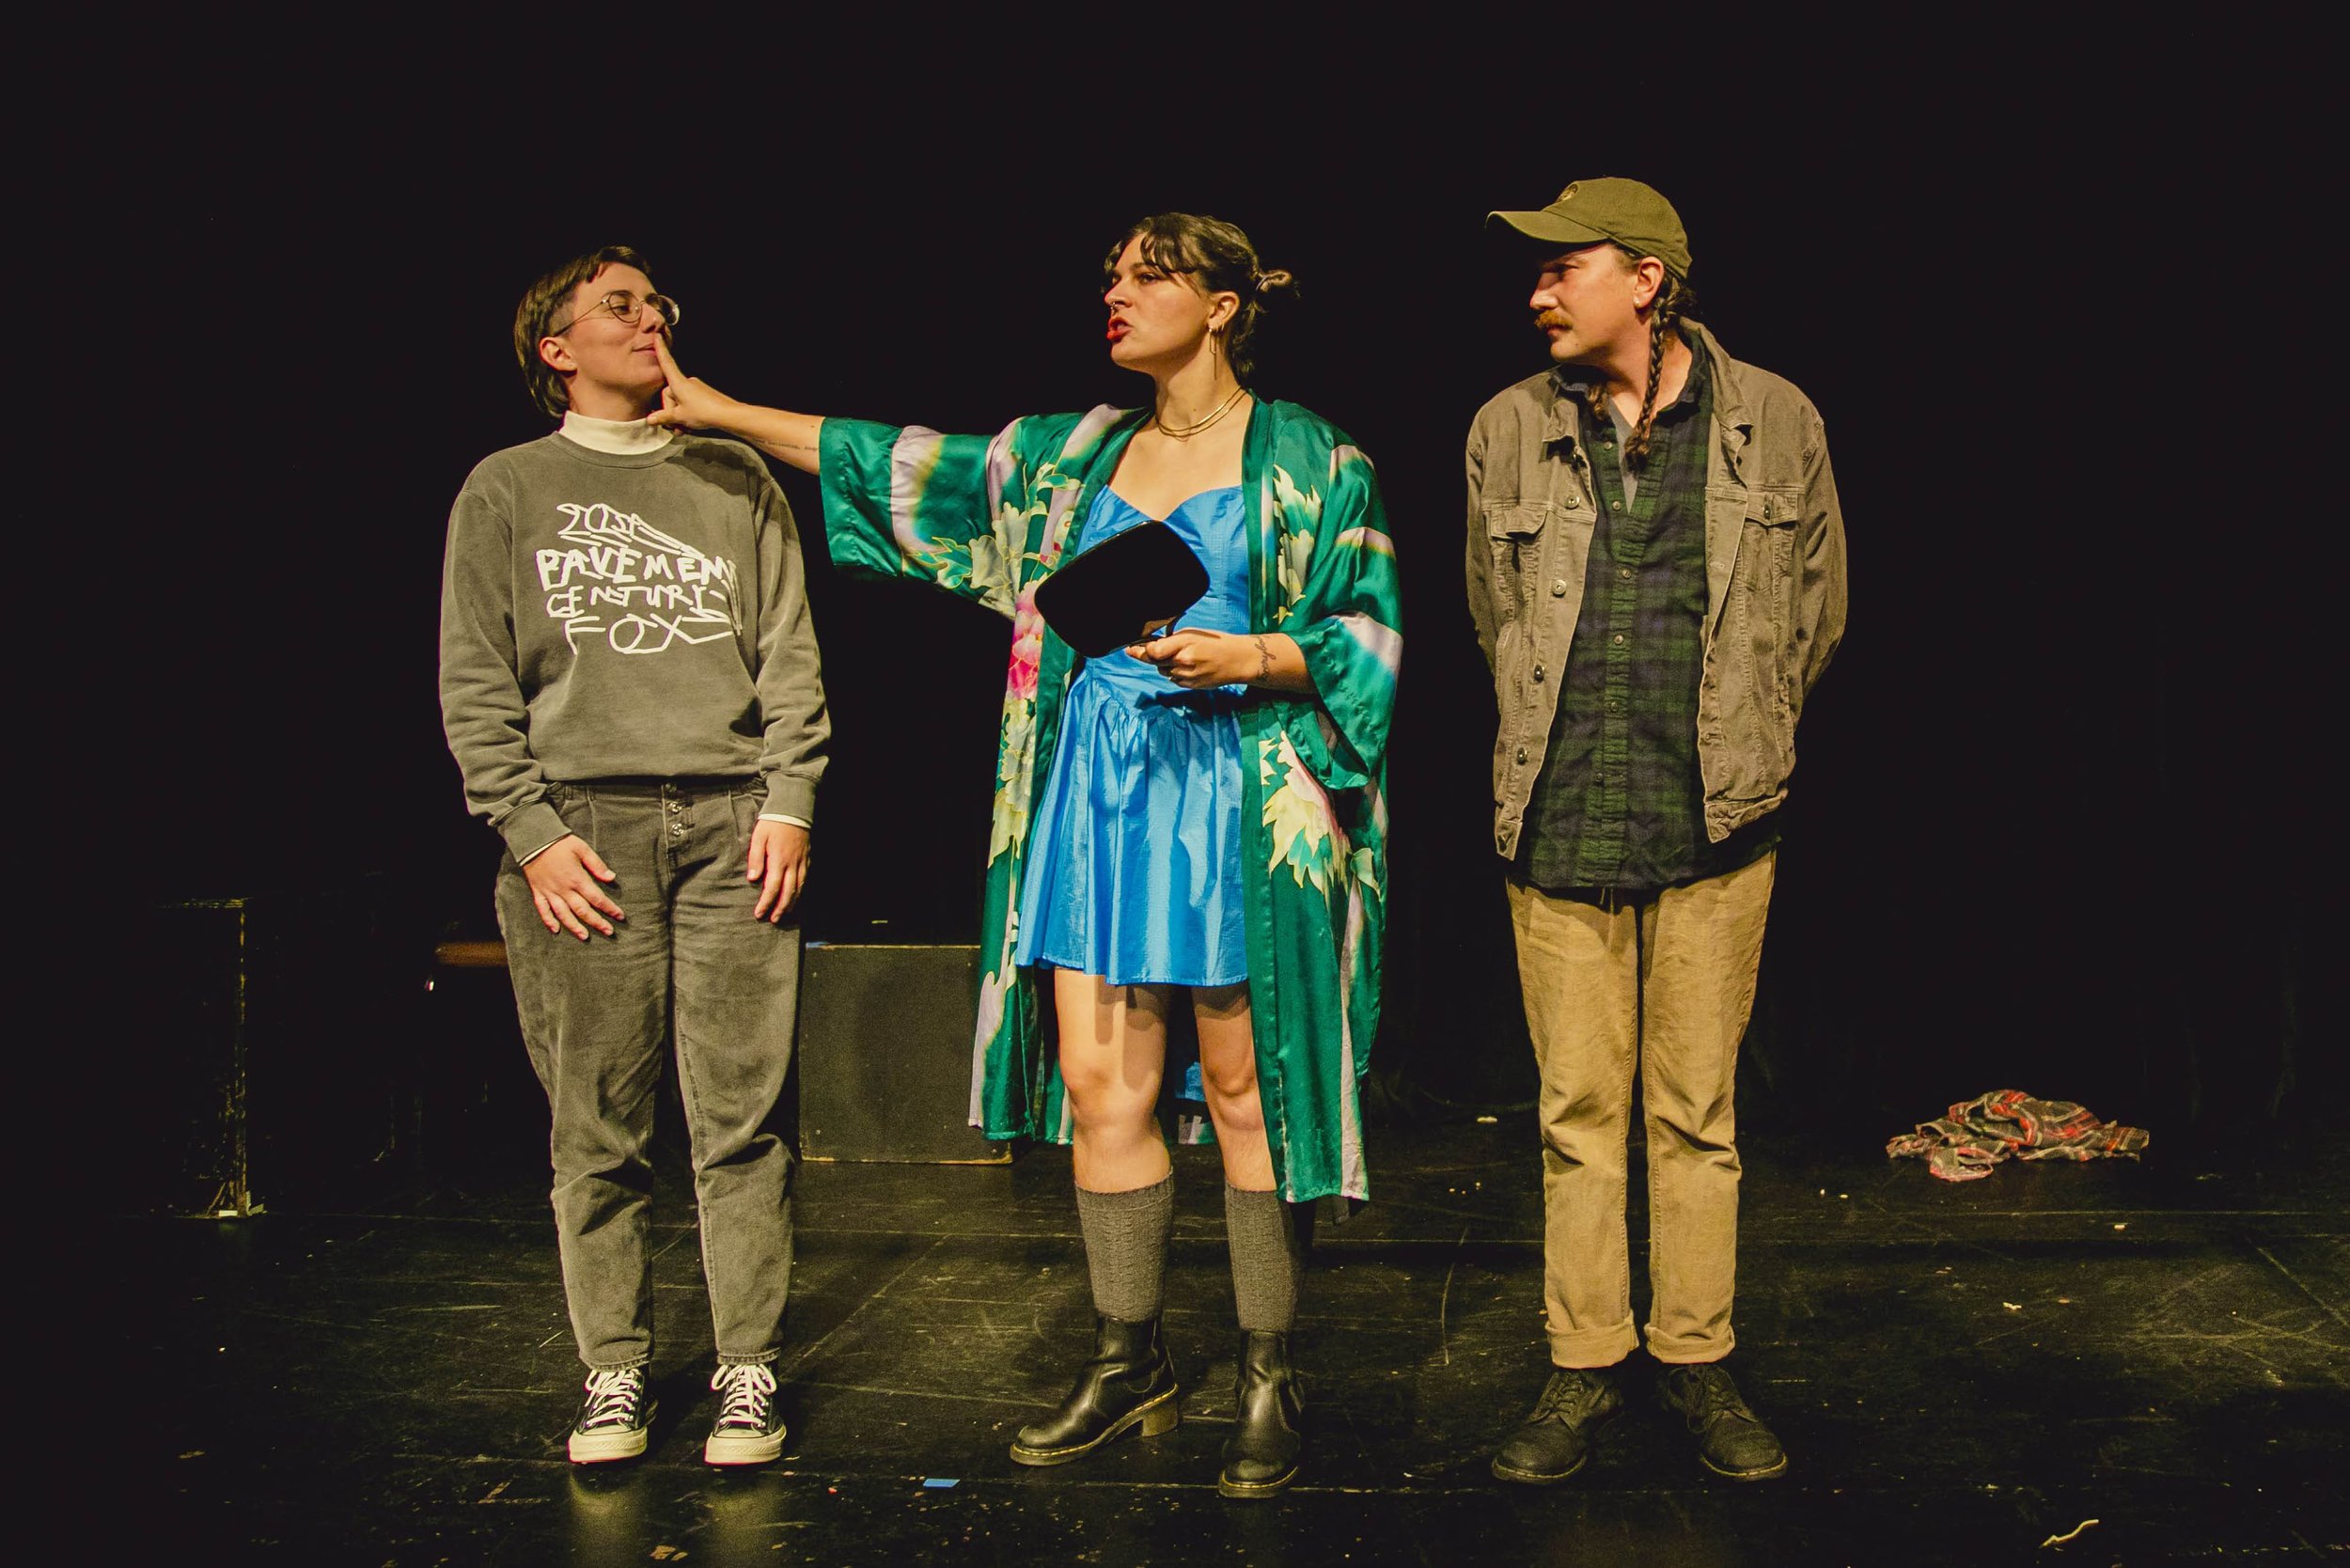 L to R: Shaina Wagner, Andie Patterson, Willie Caldwell, in "Love Life 2: To Love or Not 2 Love, A Gay Fantasia on National Themes, part 1: Live Laugh Love Life"